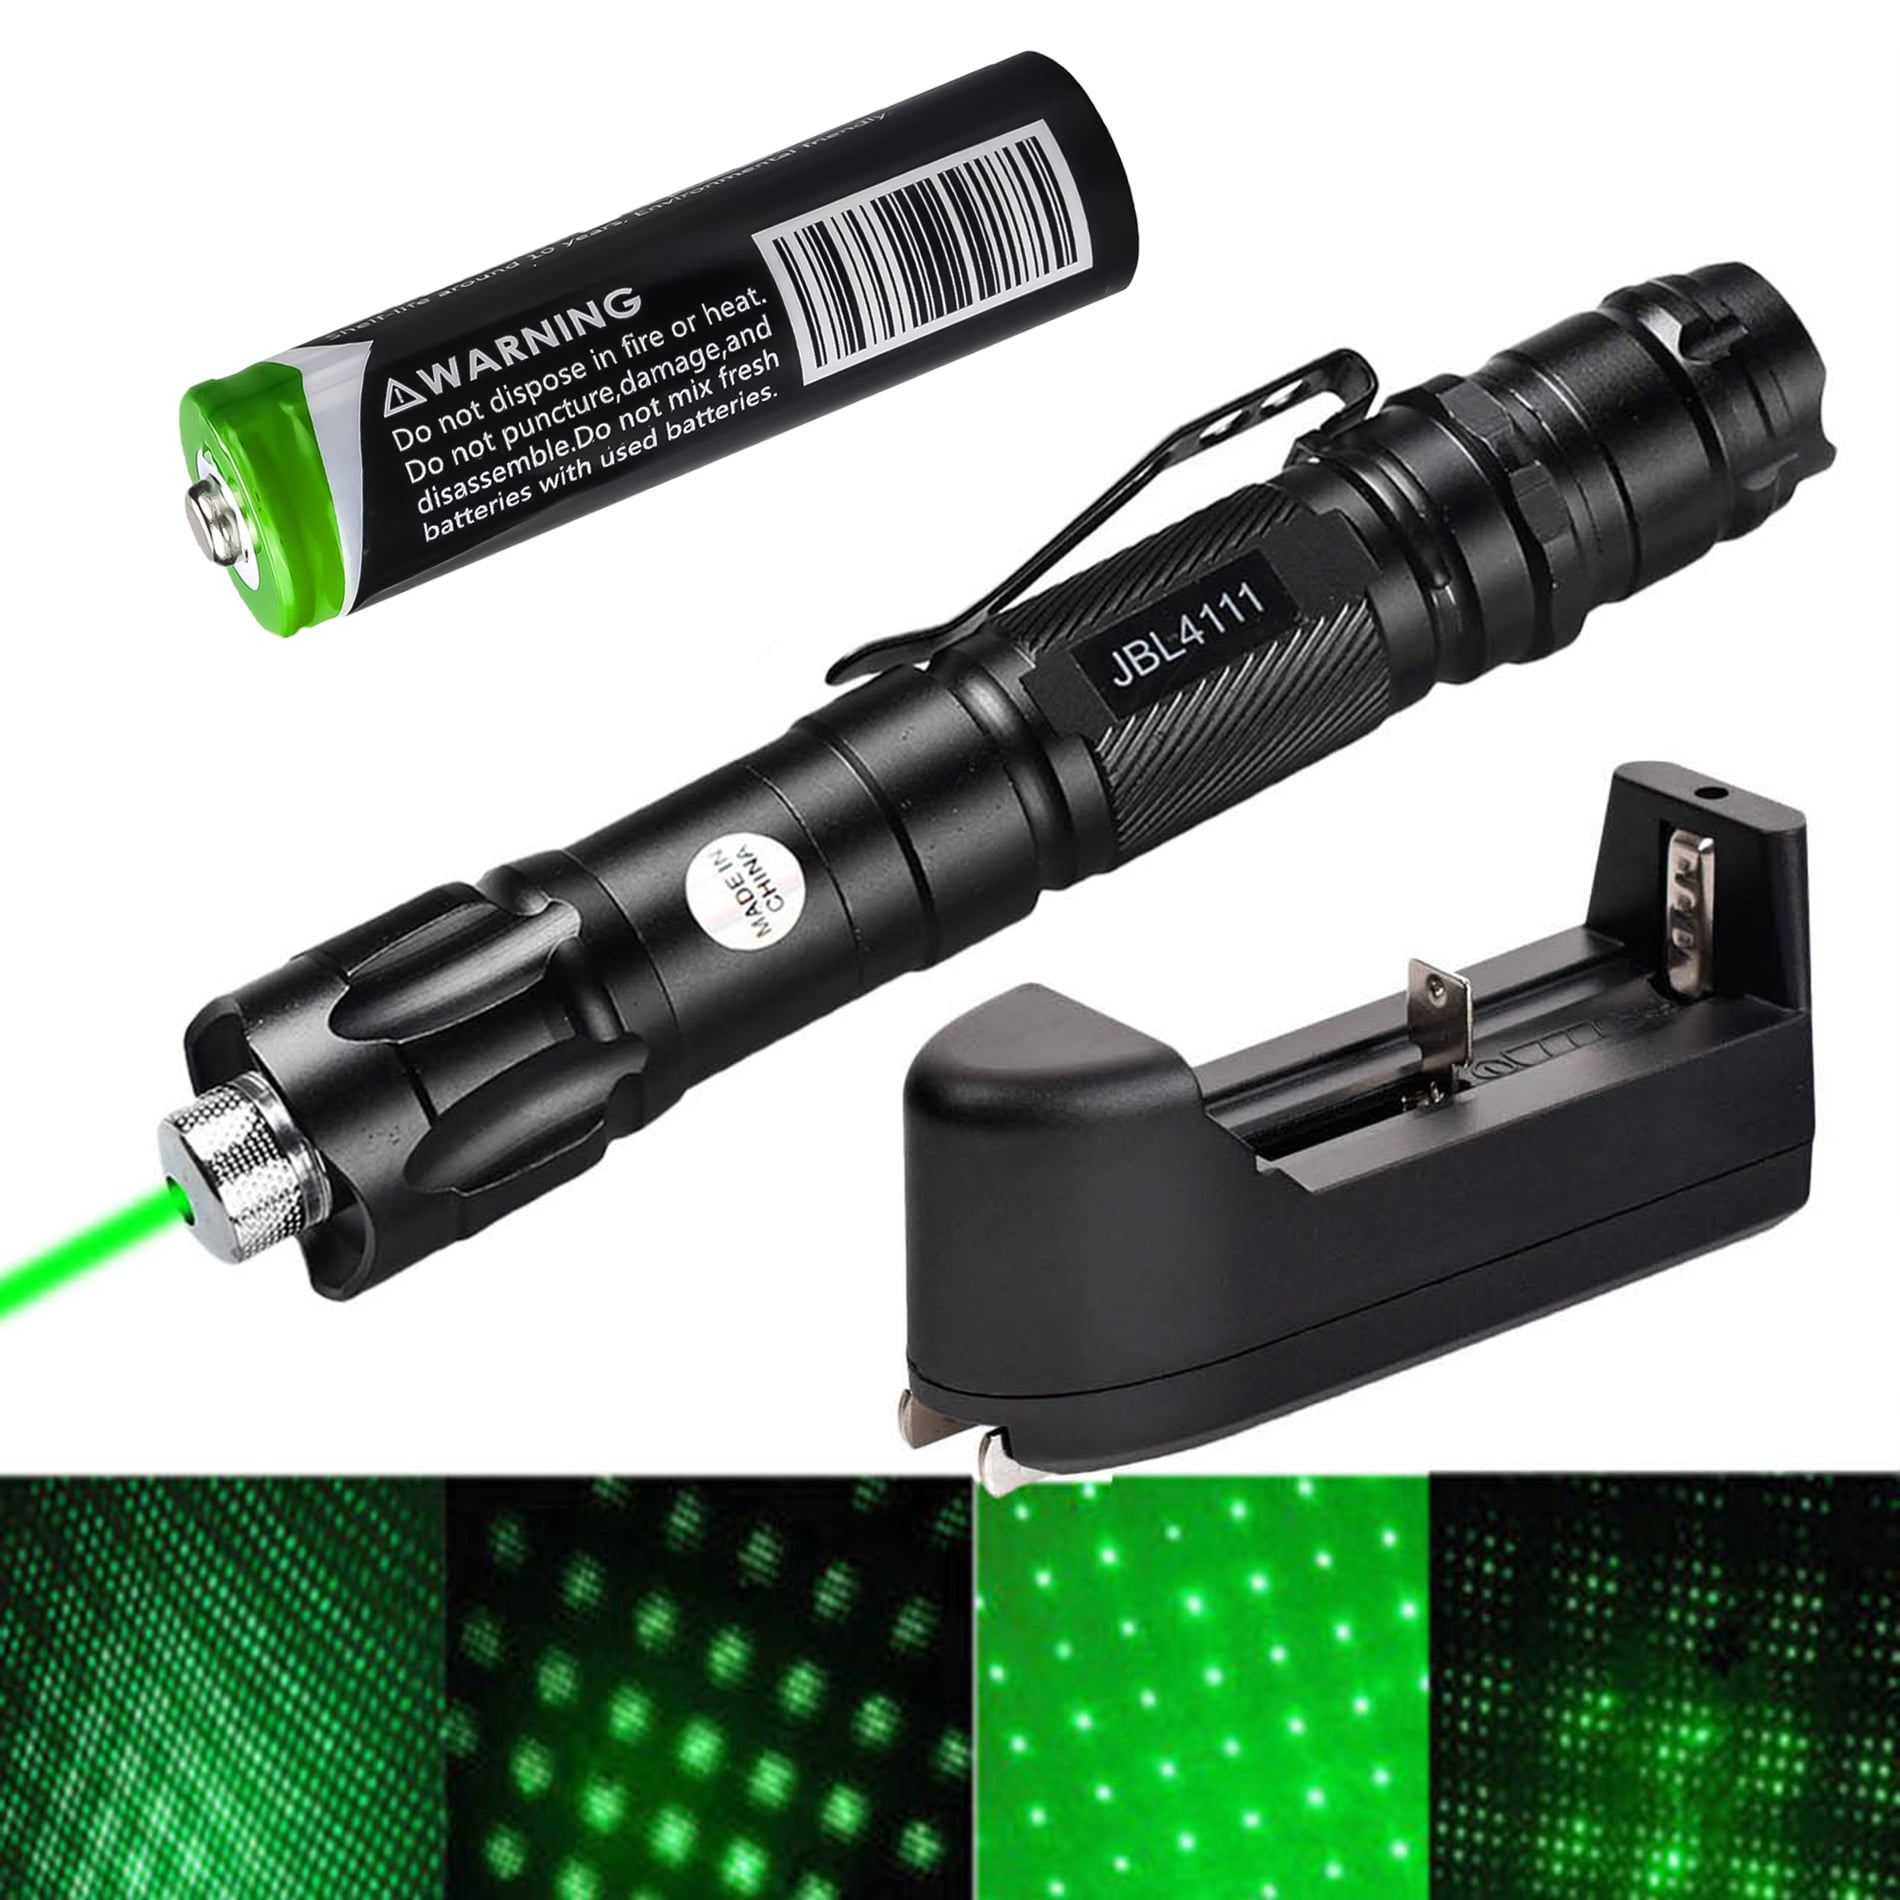 2PC Visible Beam Green Laser Pointer Pen 532nm Bright Lazer+18650Battery+Charger 